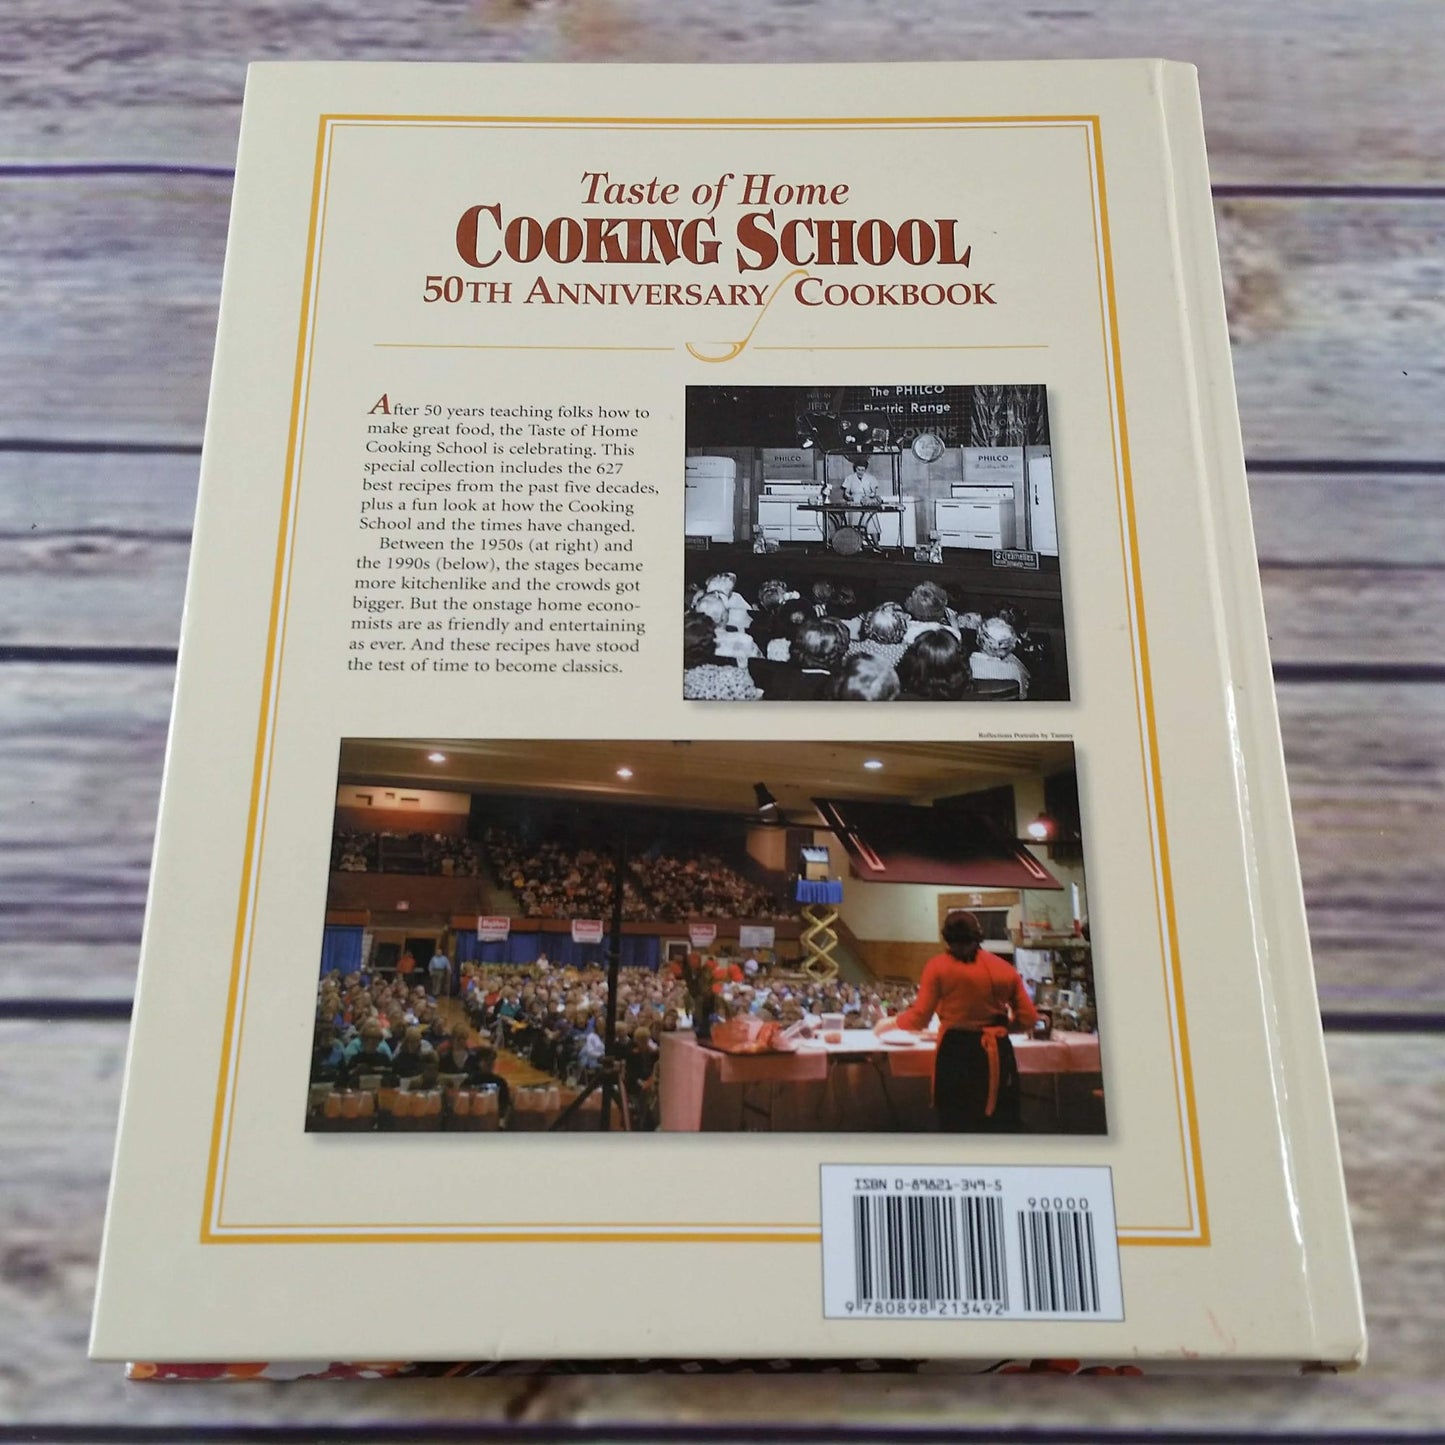 Taste of Home Cooking School Cookbook Hardcover Pictures 627 Recipes 50th Year Anniversary Home Economist